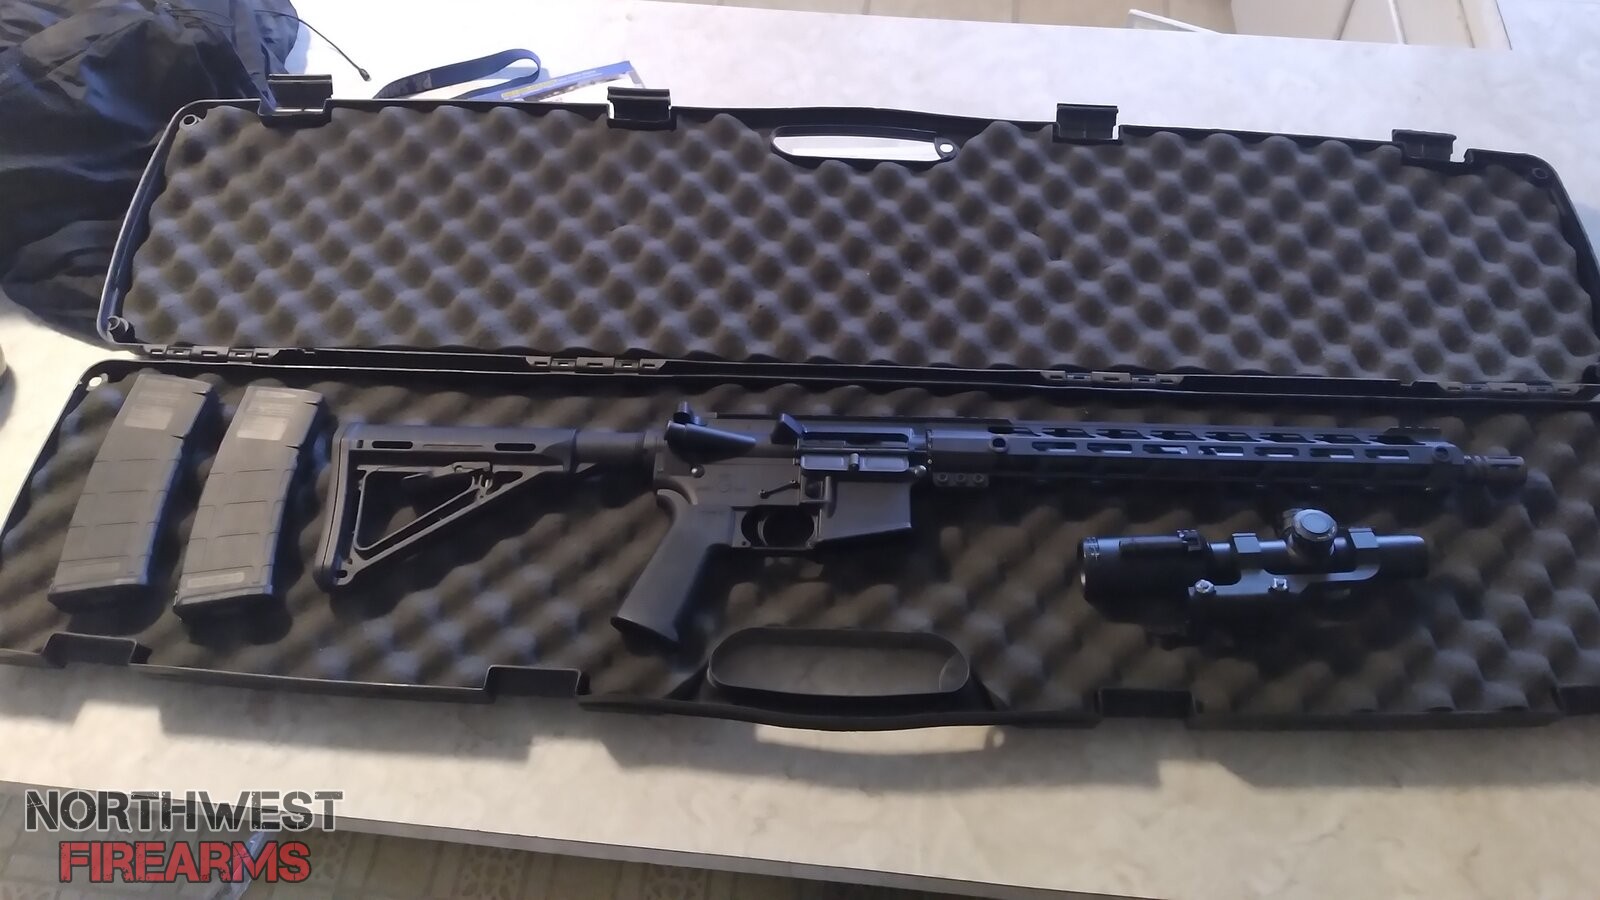 PSA ar-15 with mags and LPVO | Northwest Firearms